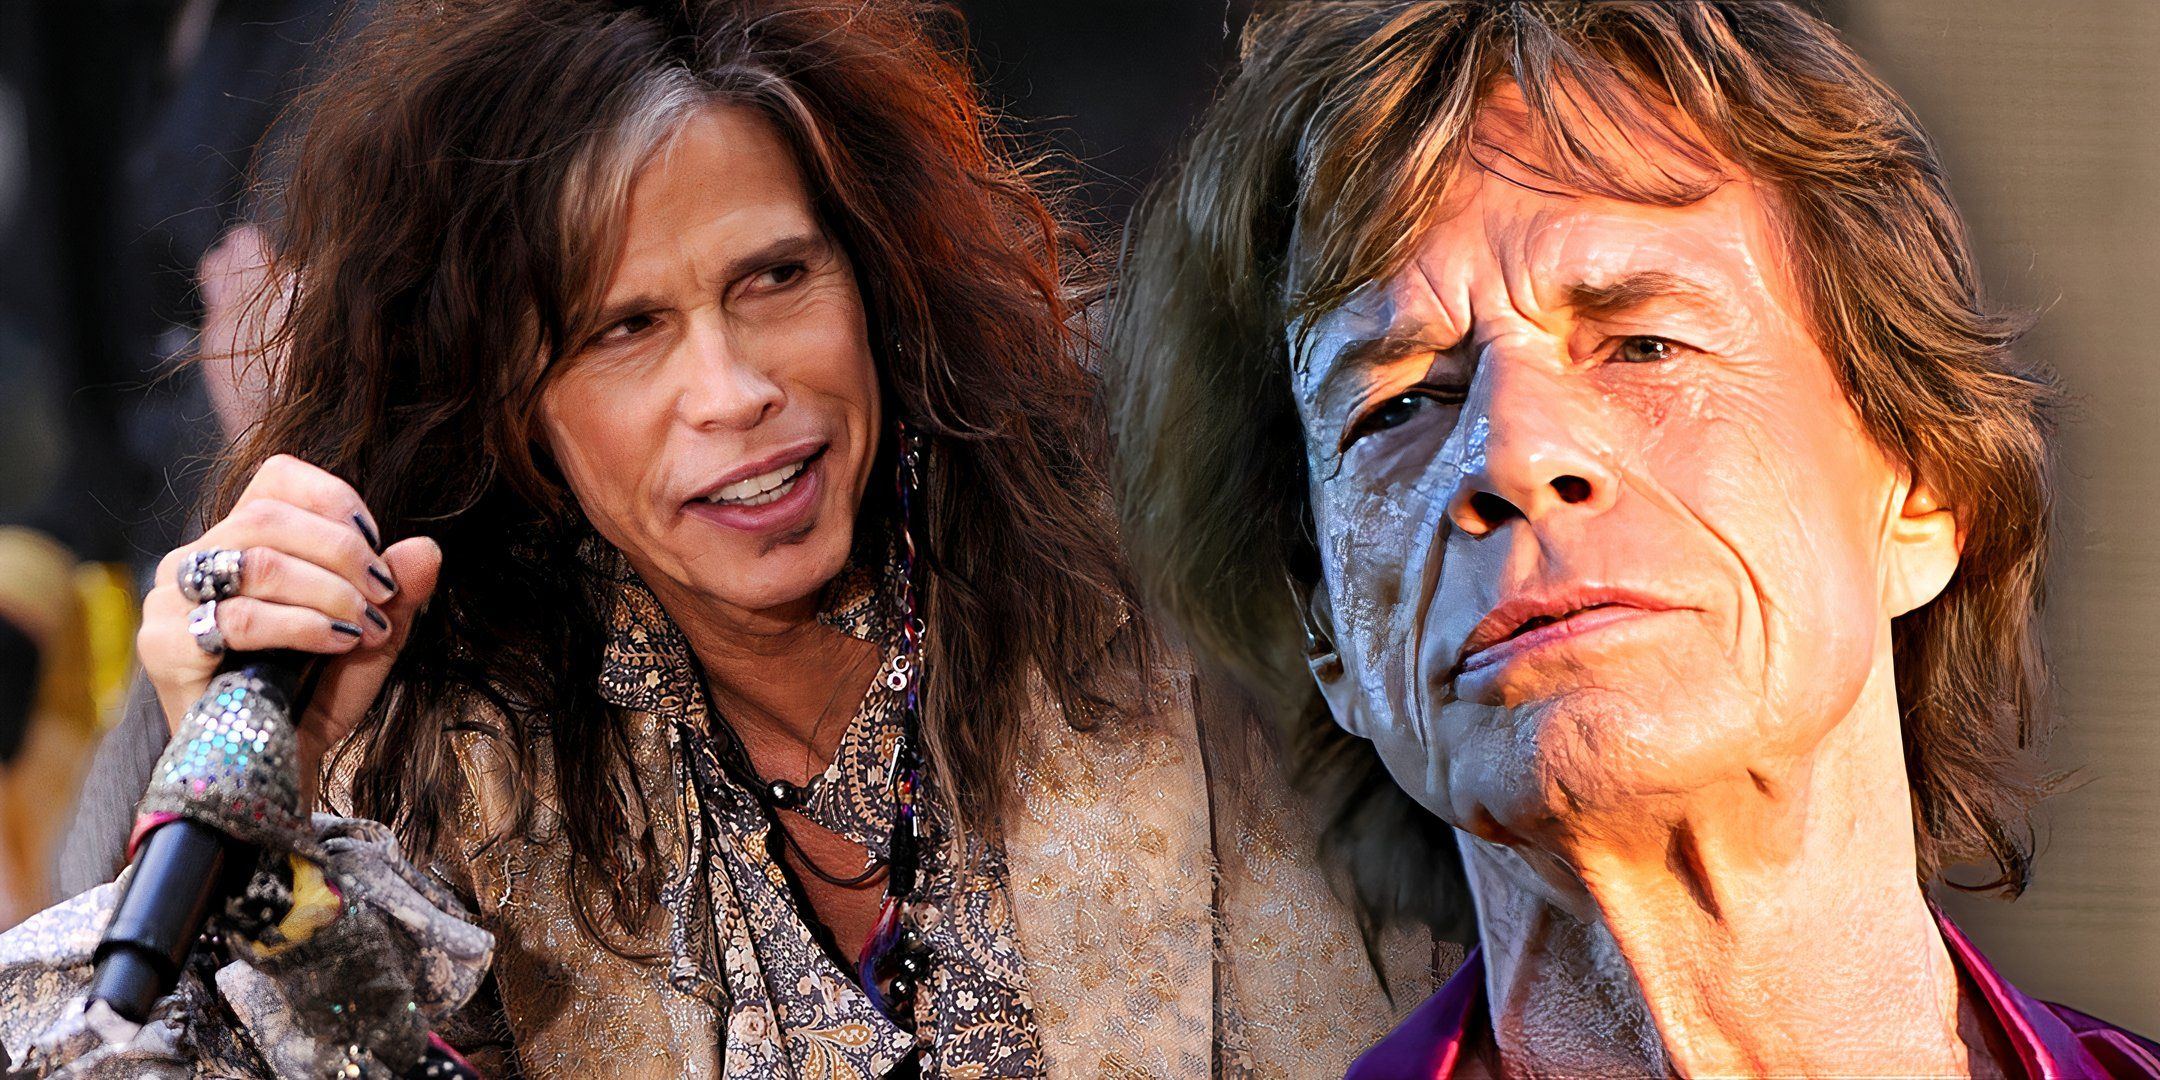 Rolling Stones front-man Mick Jagger and Aerosmith's Steven Tyler 